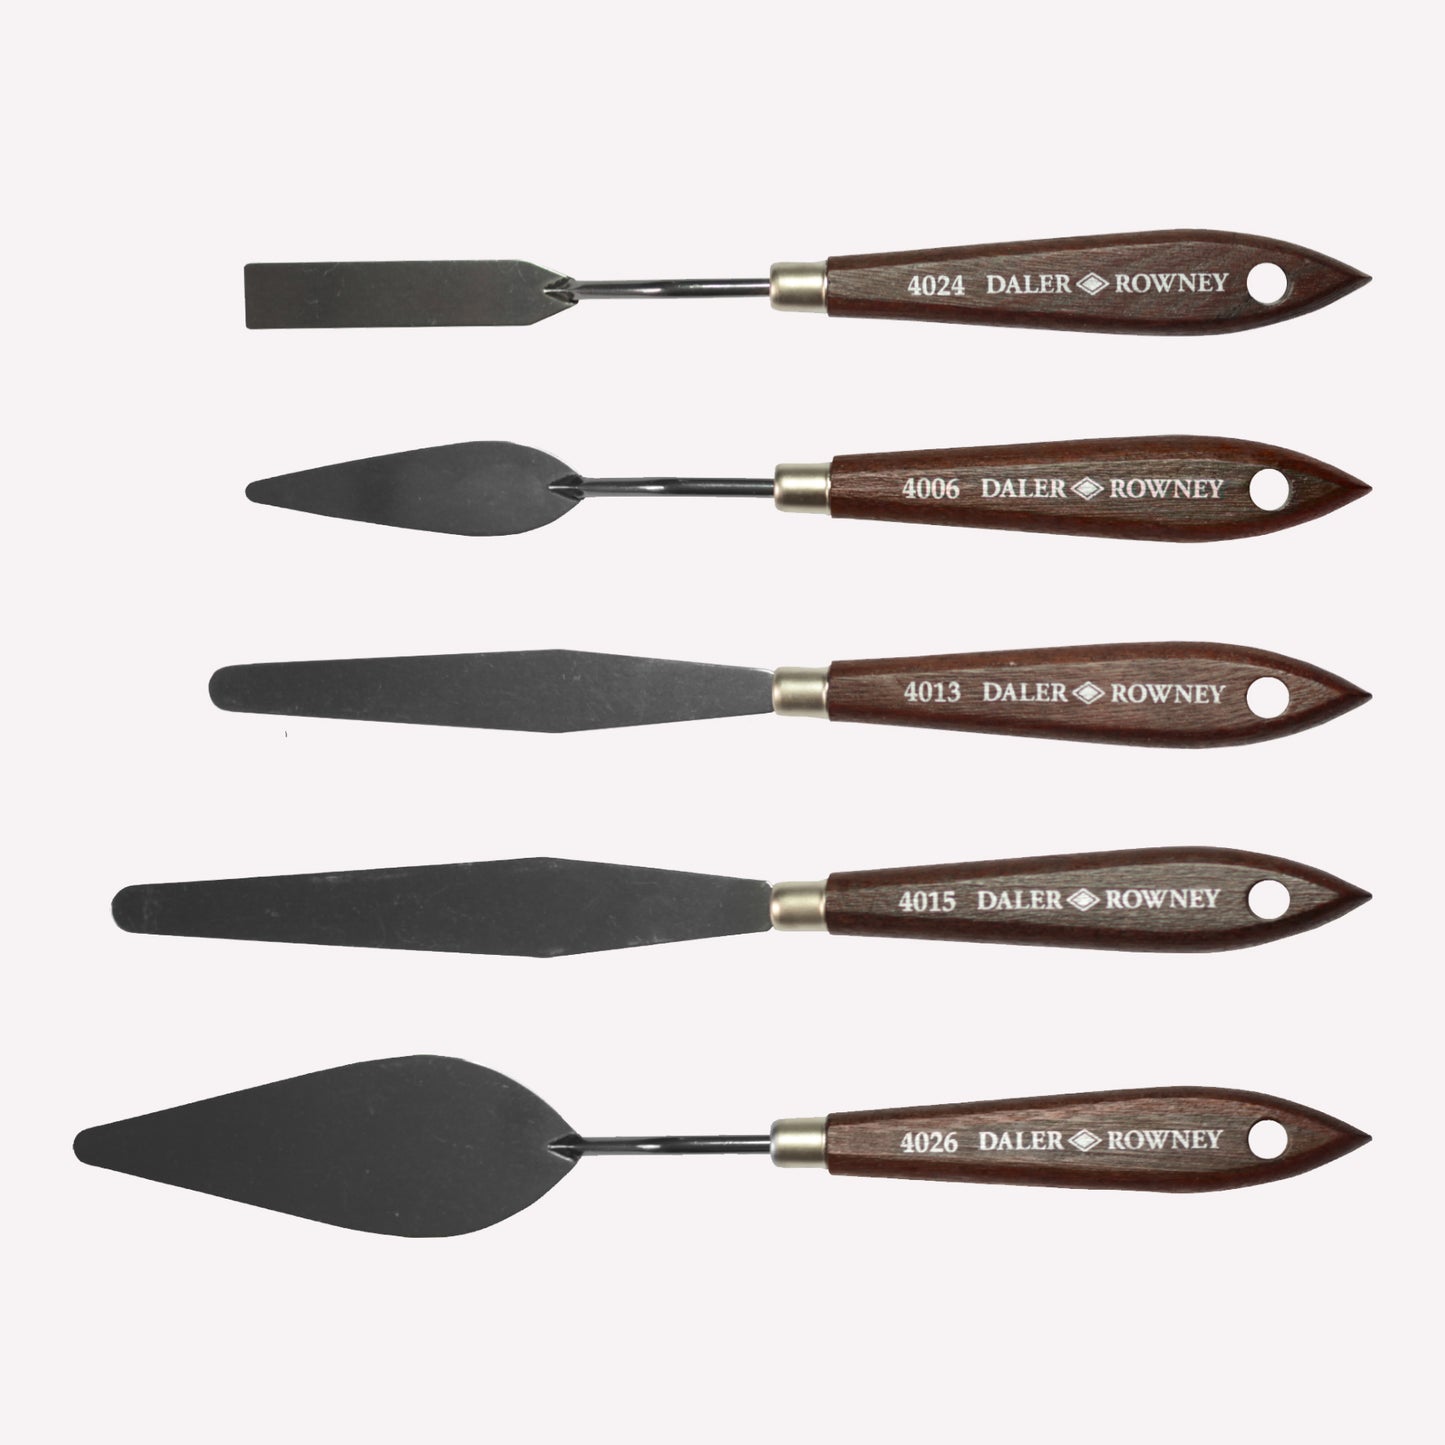 Daler Rowney’s high quality painting and palette knife range, with polished blades, brass ferrules and classy wooden handle. 